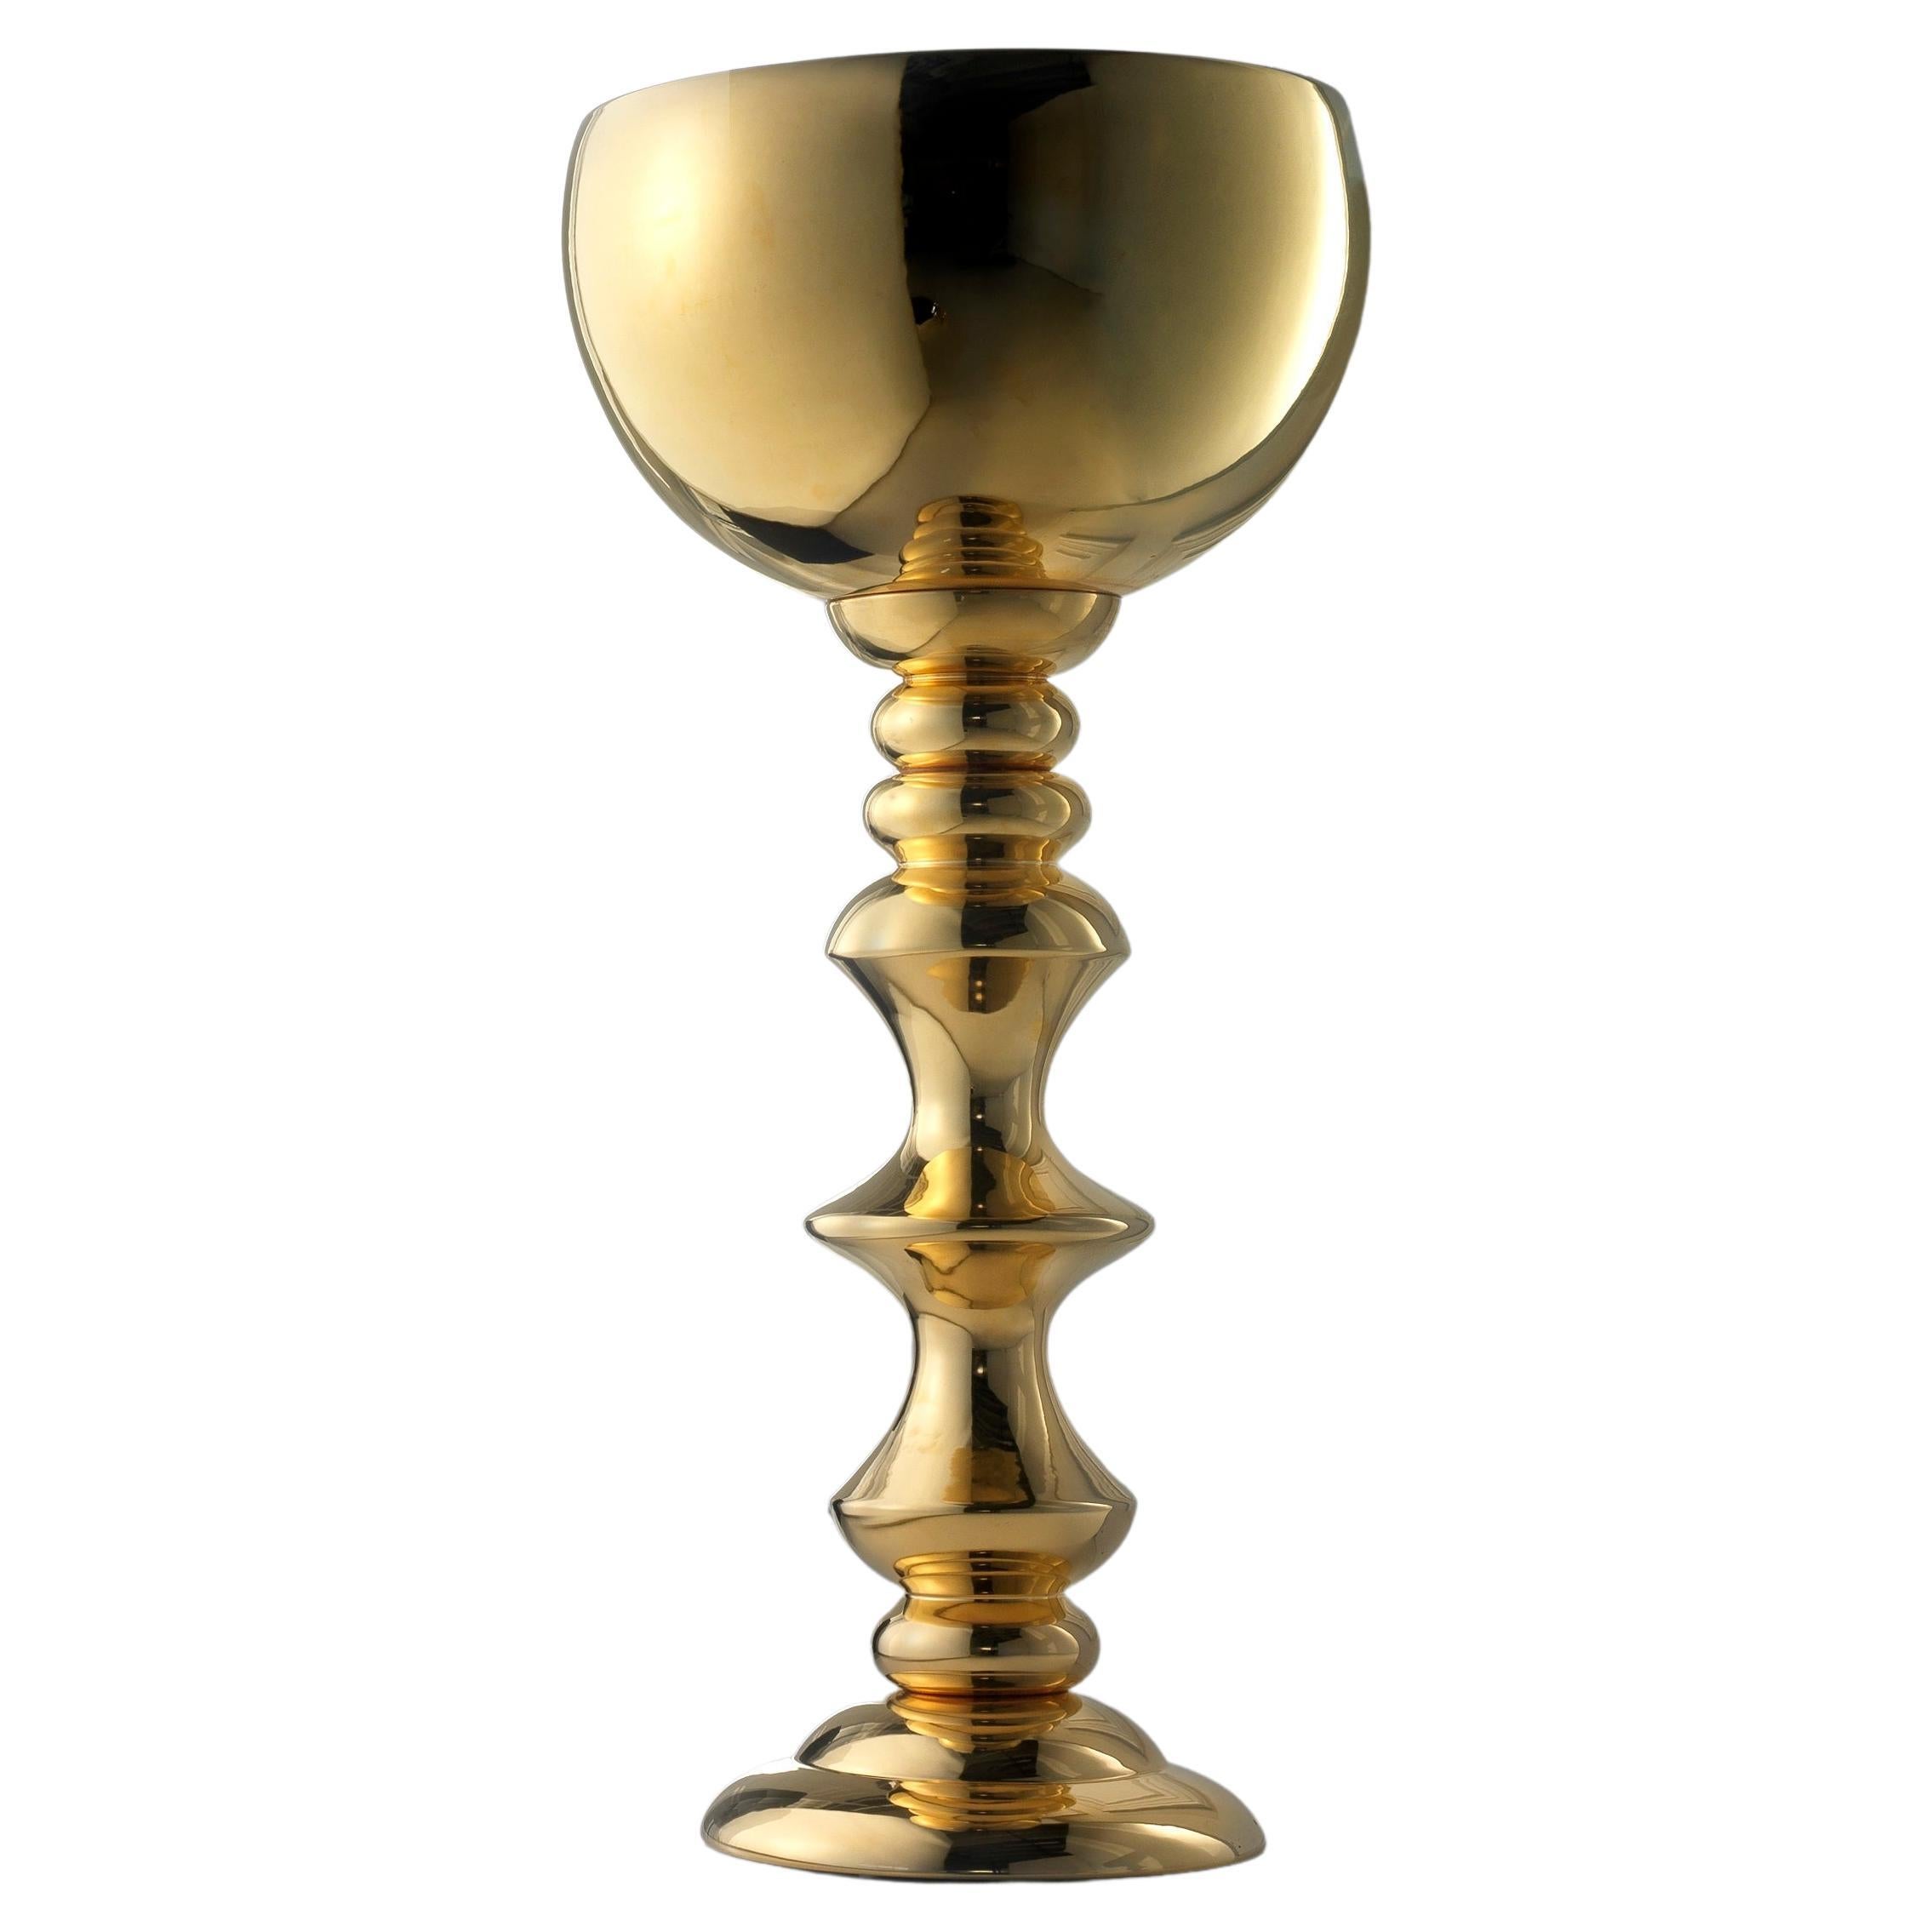 Ceramic Cup "Mida3" Handcrafted in 24kt Gold, by Gabriella B. Made in Italy